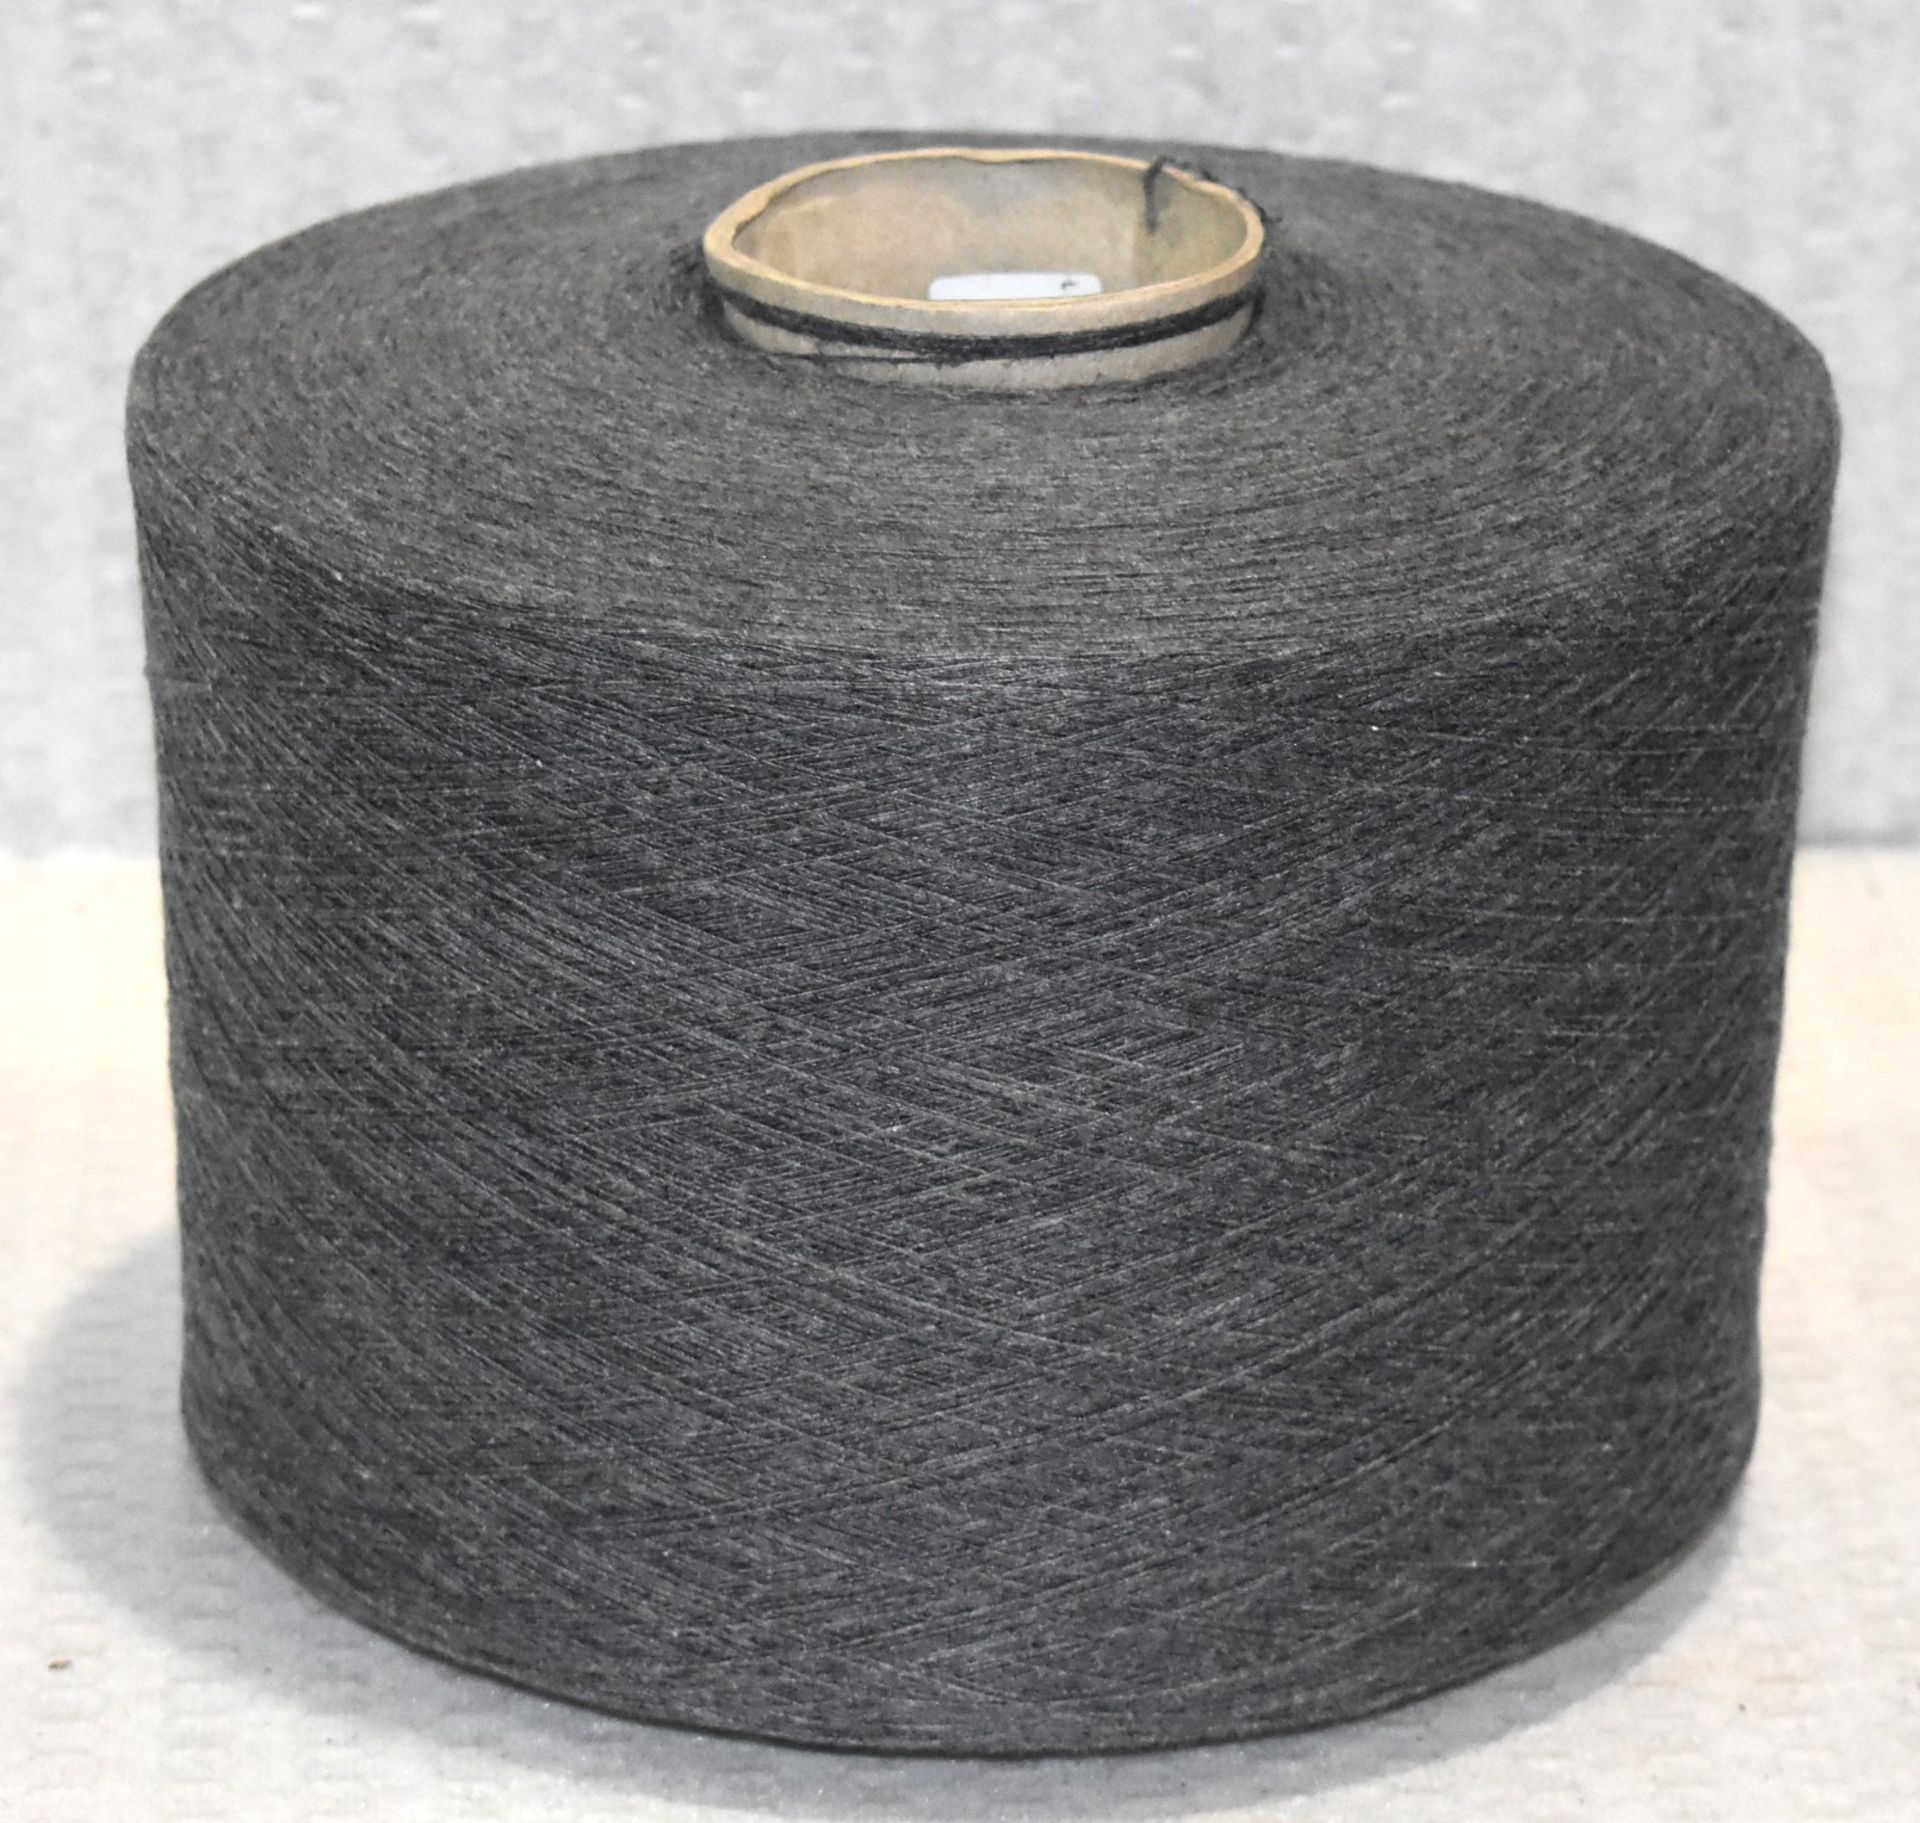 4 x Cones of 1/13 MicroCotton Knitting Yarn - Mid Grey - Approx Weight: 2,500g - New Stock ABL Yarn - Image 8 of 17